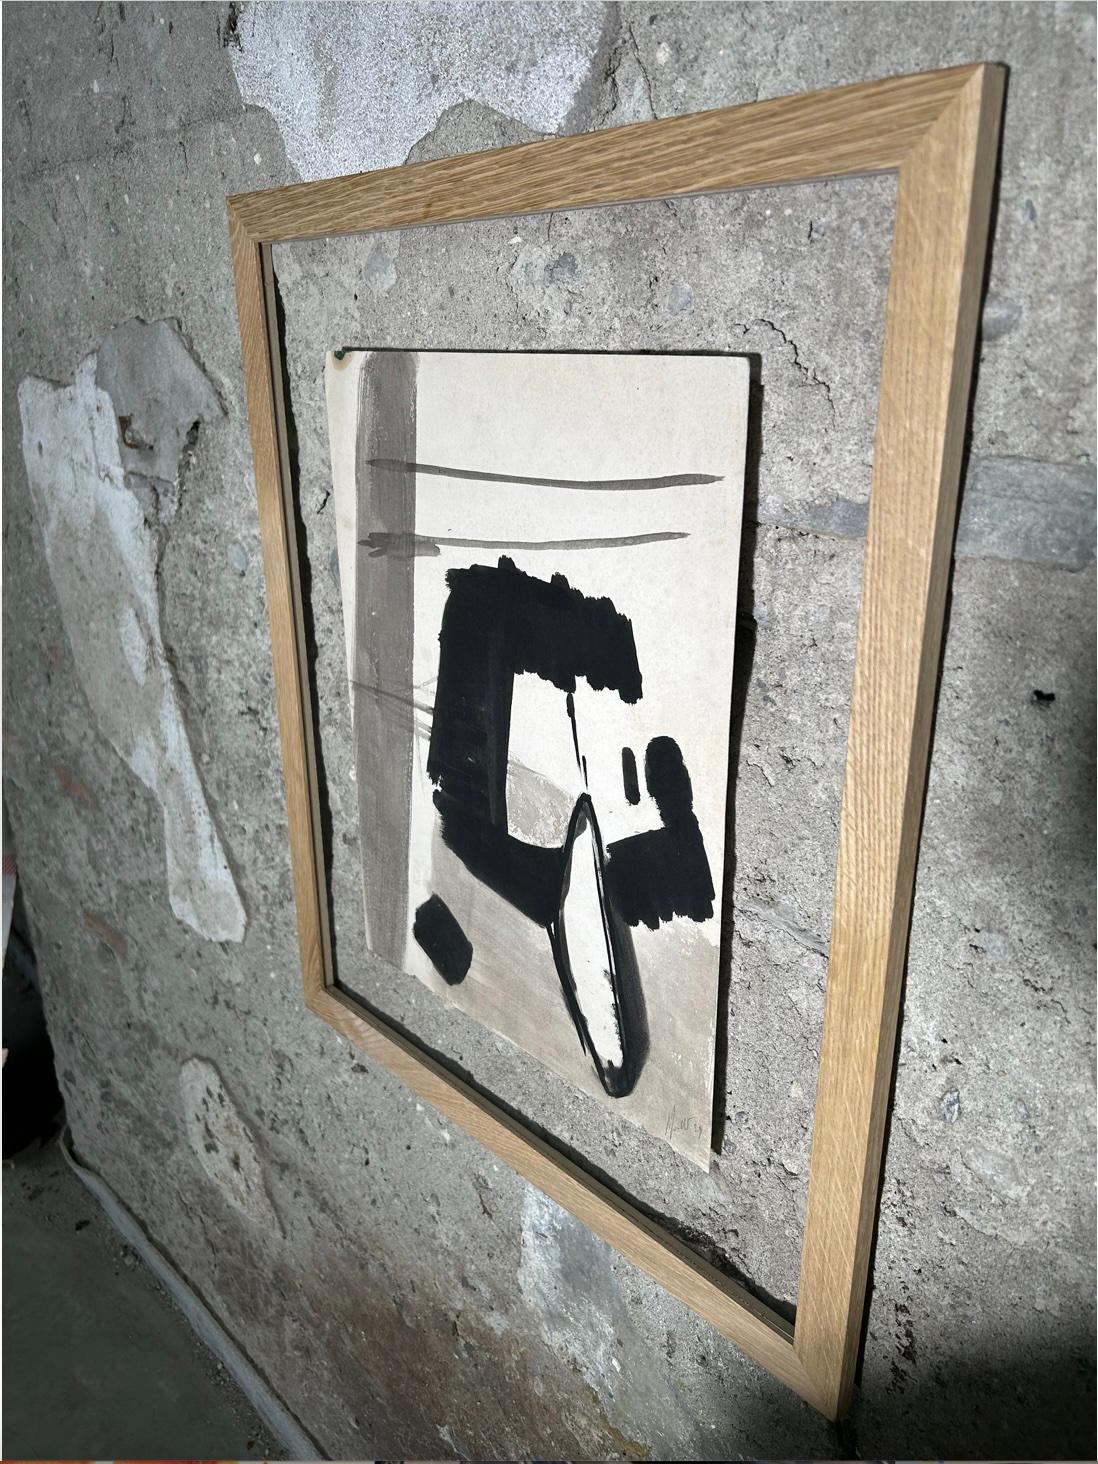 Painting on canvas by Jean Miotte from 1959
Abstract composition in India ink on canvas without frame (sent rolled).
Dated and signed by the artist.

Unframed: 42.5 x 33 x 1.5 cm